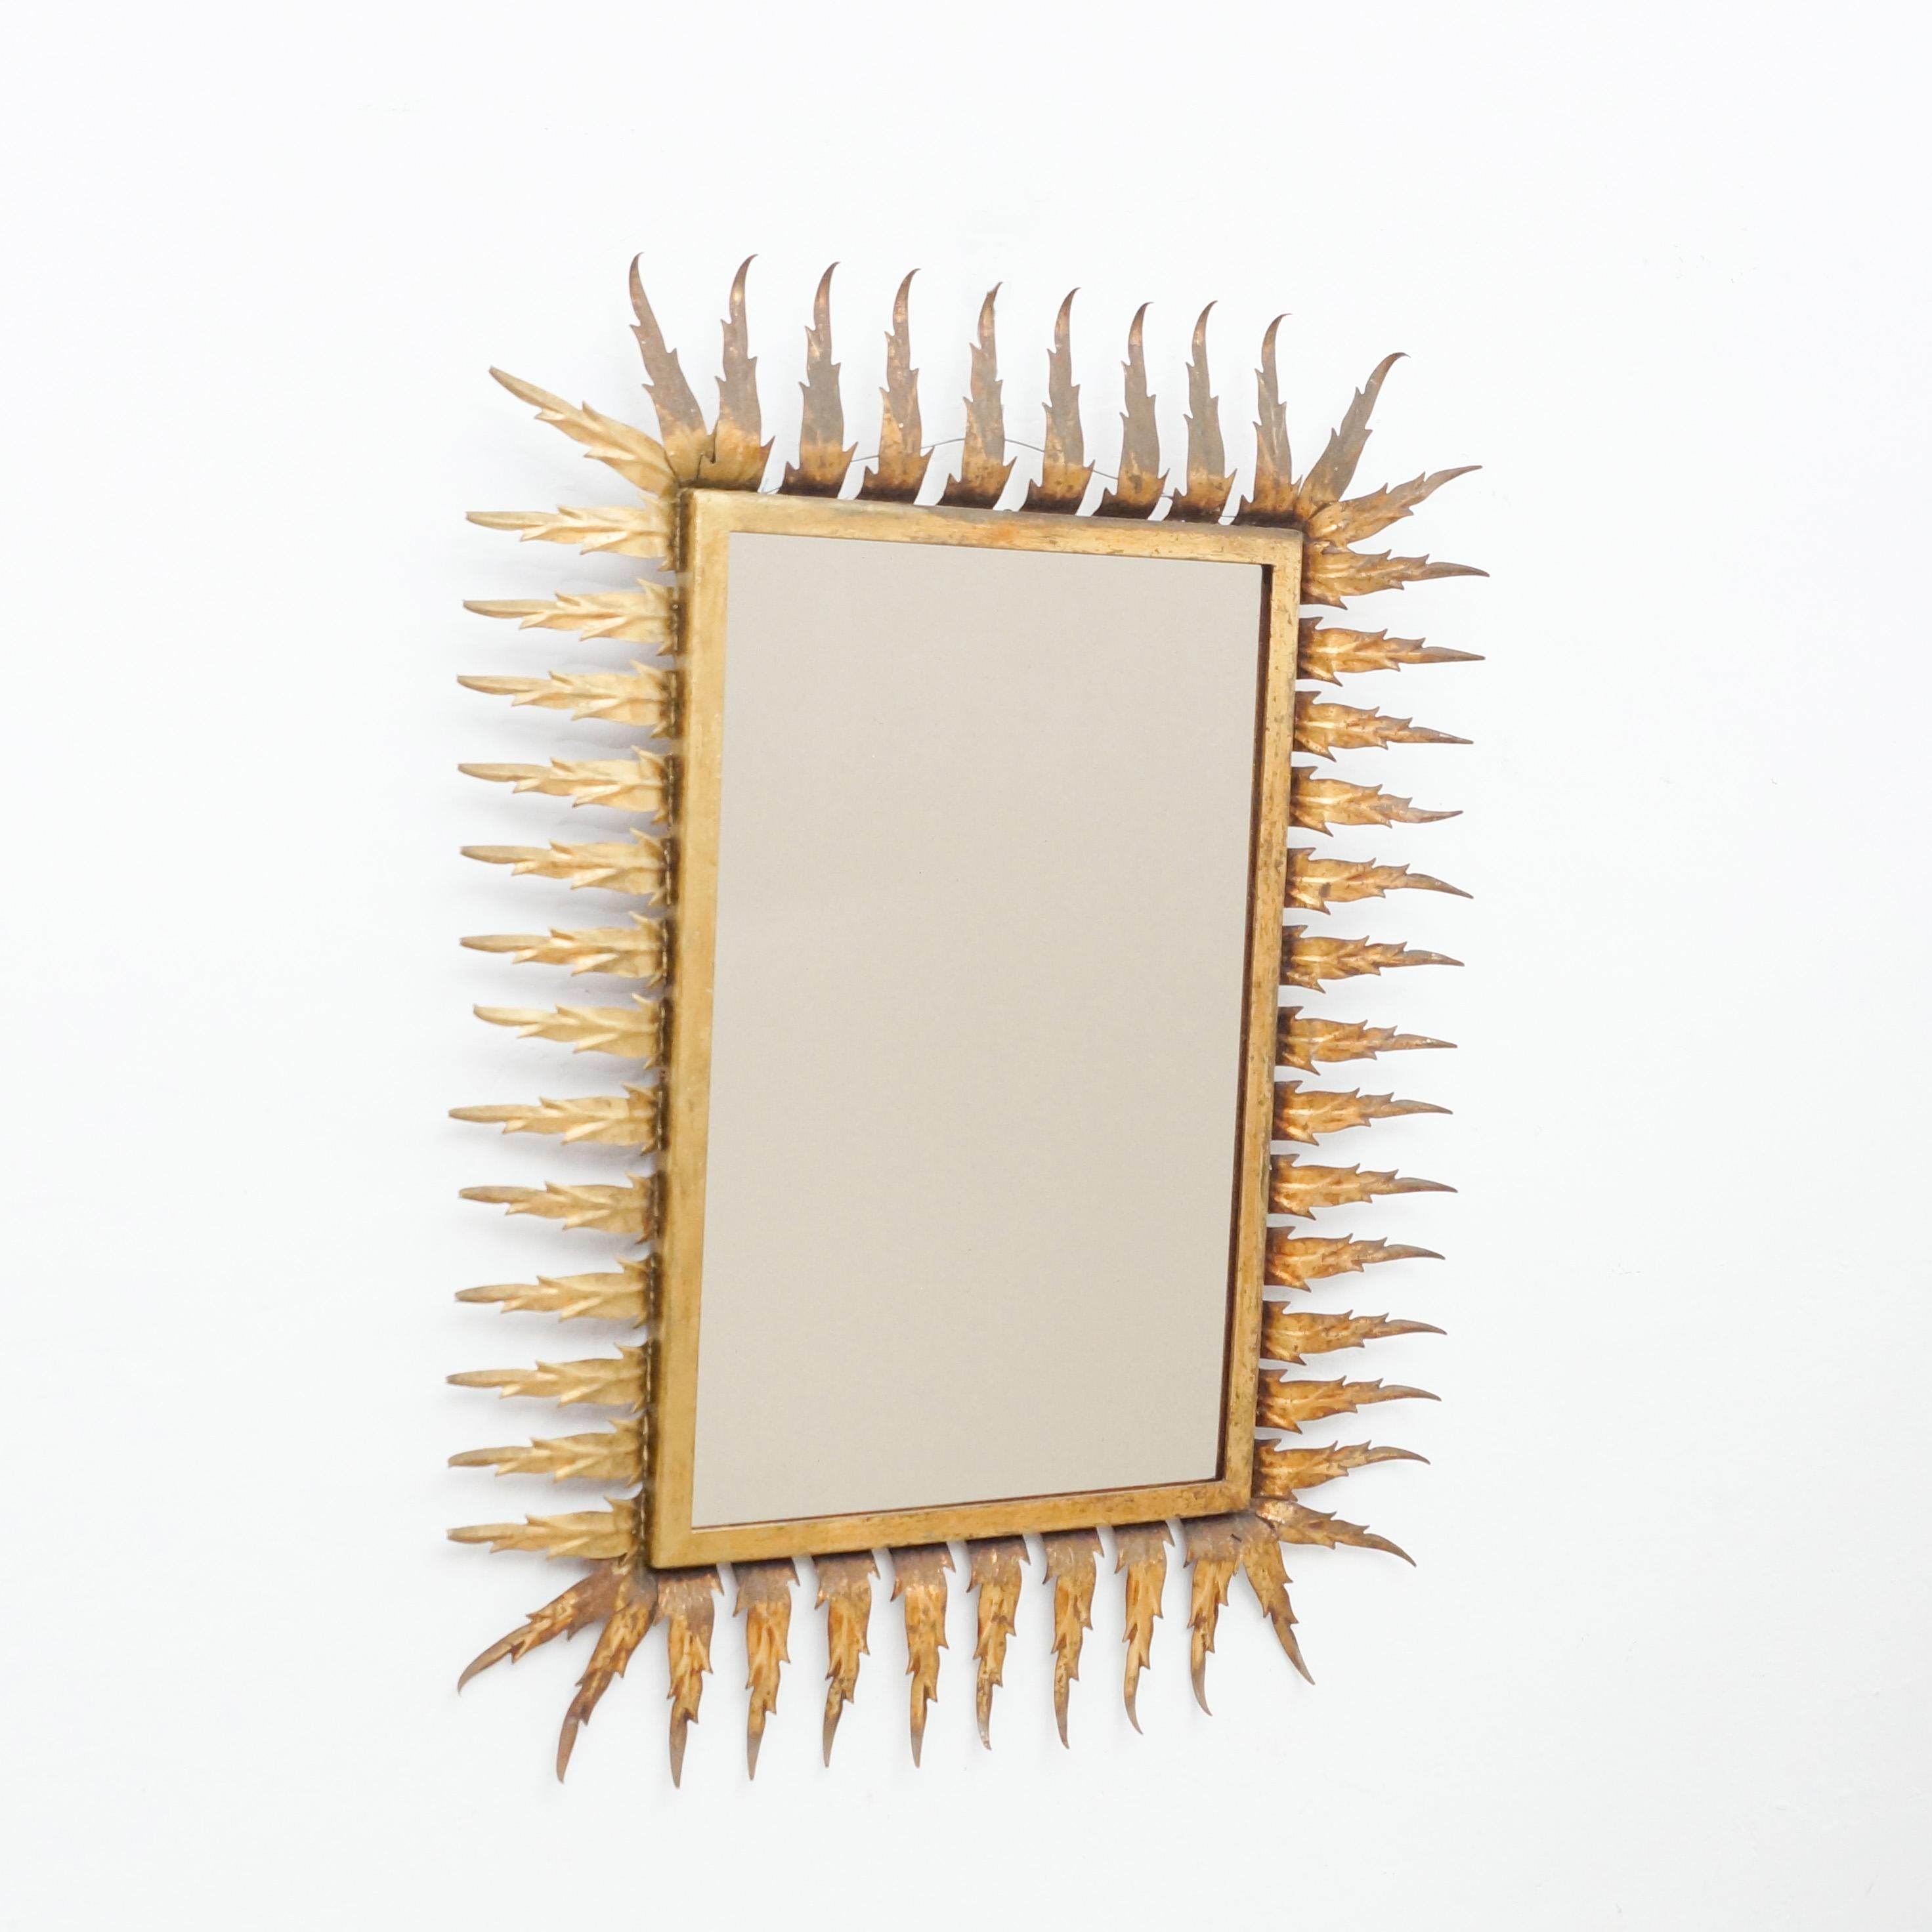 Mid-Century Modern sunburst mirror brass, circa 1960
Traditionally manufactured in France.
By unknown designer.

In original condition with minor wear consistent of age and use, preserving a beautiful patina.

  